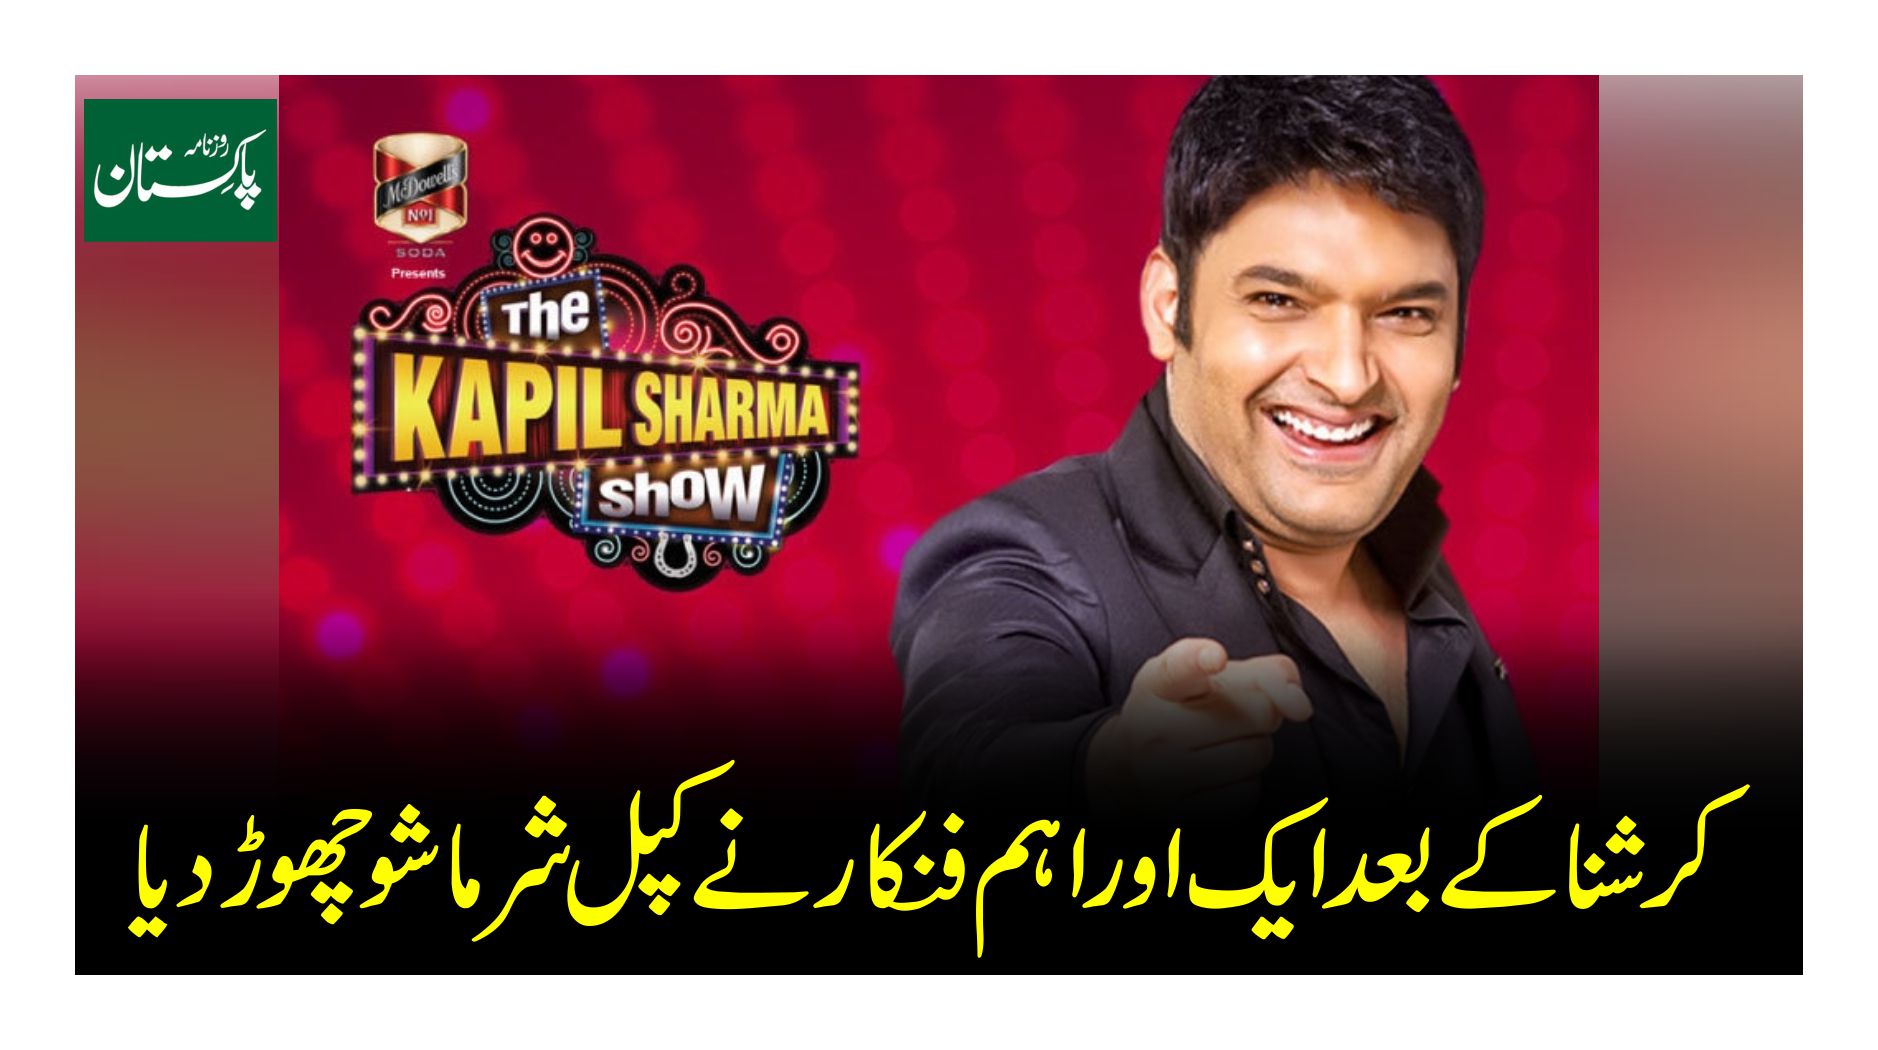 After Krishna, another important artist left The Kapil Sharma Show